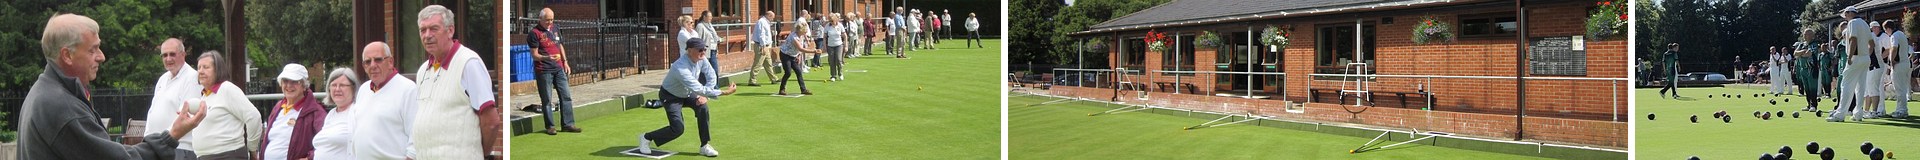 Bowls Wiltshire Meeting